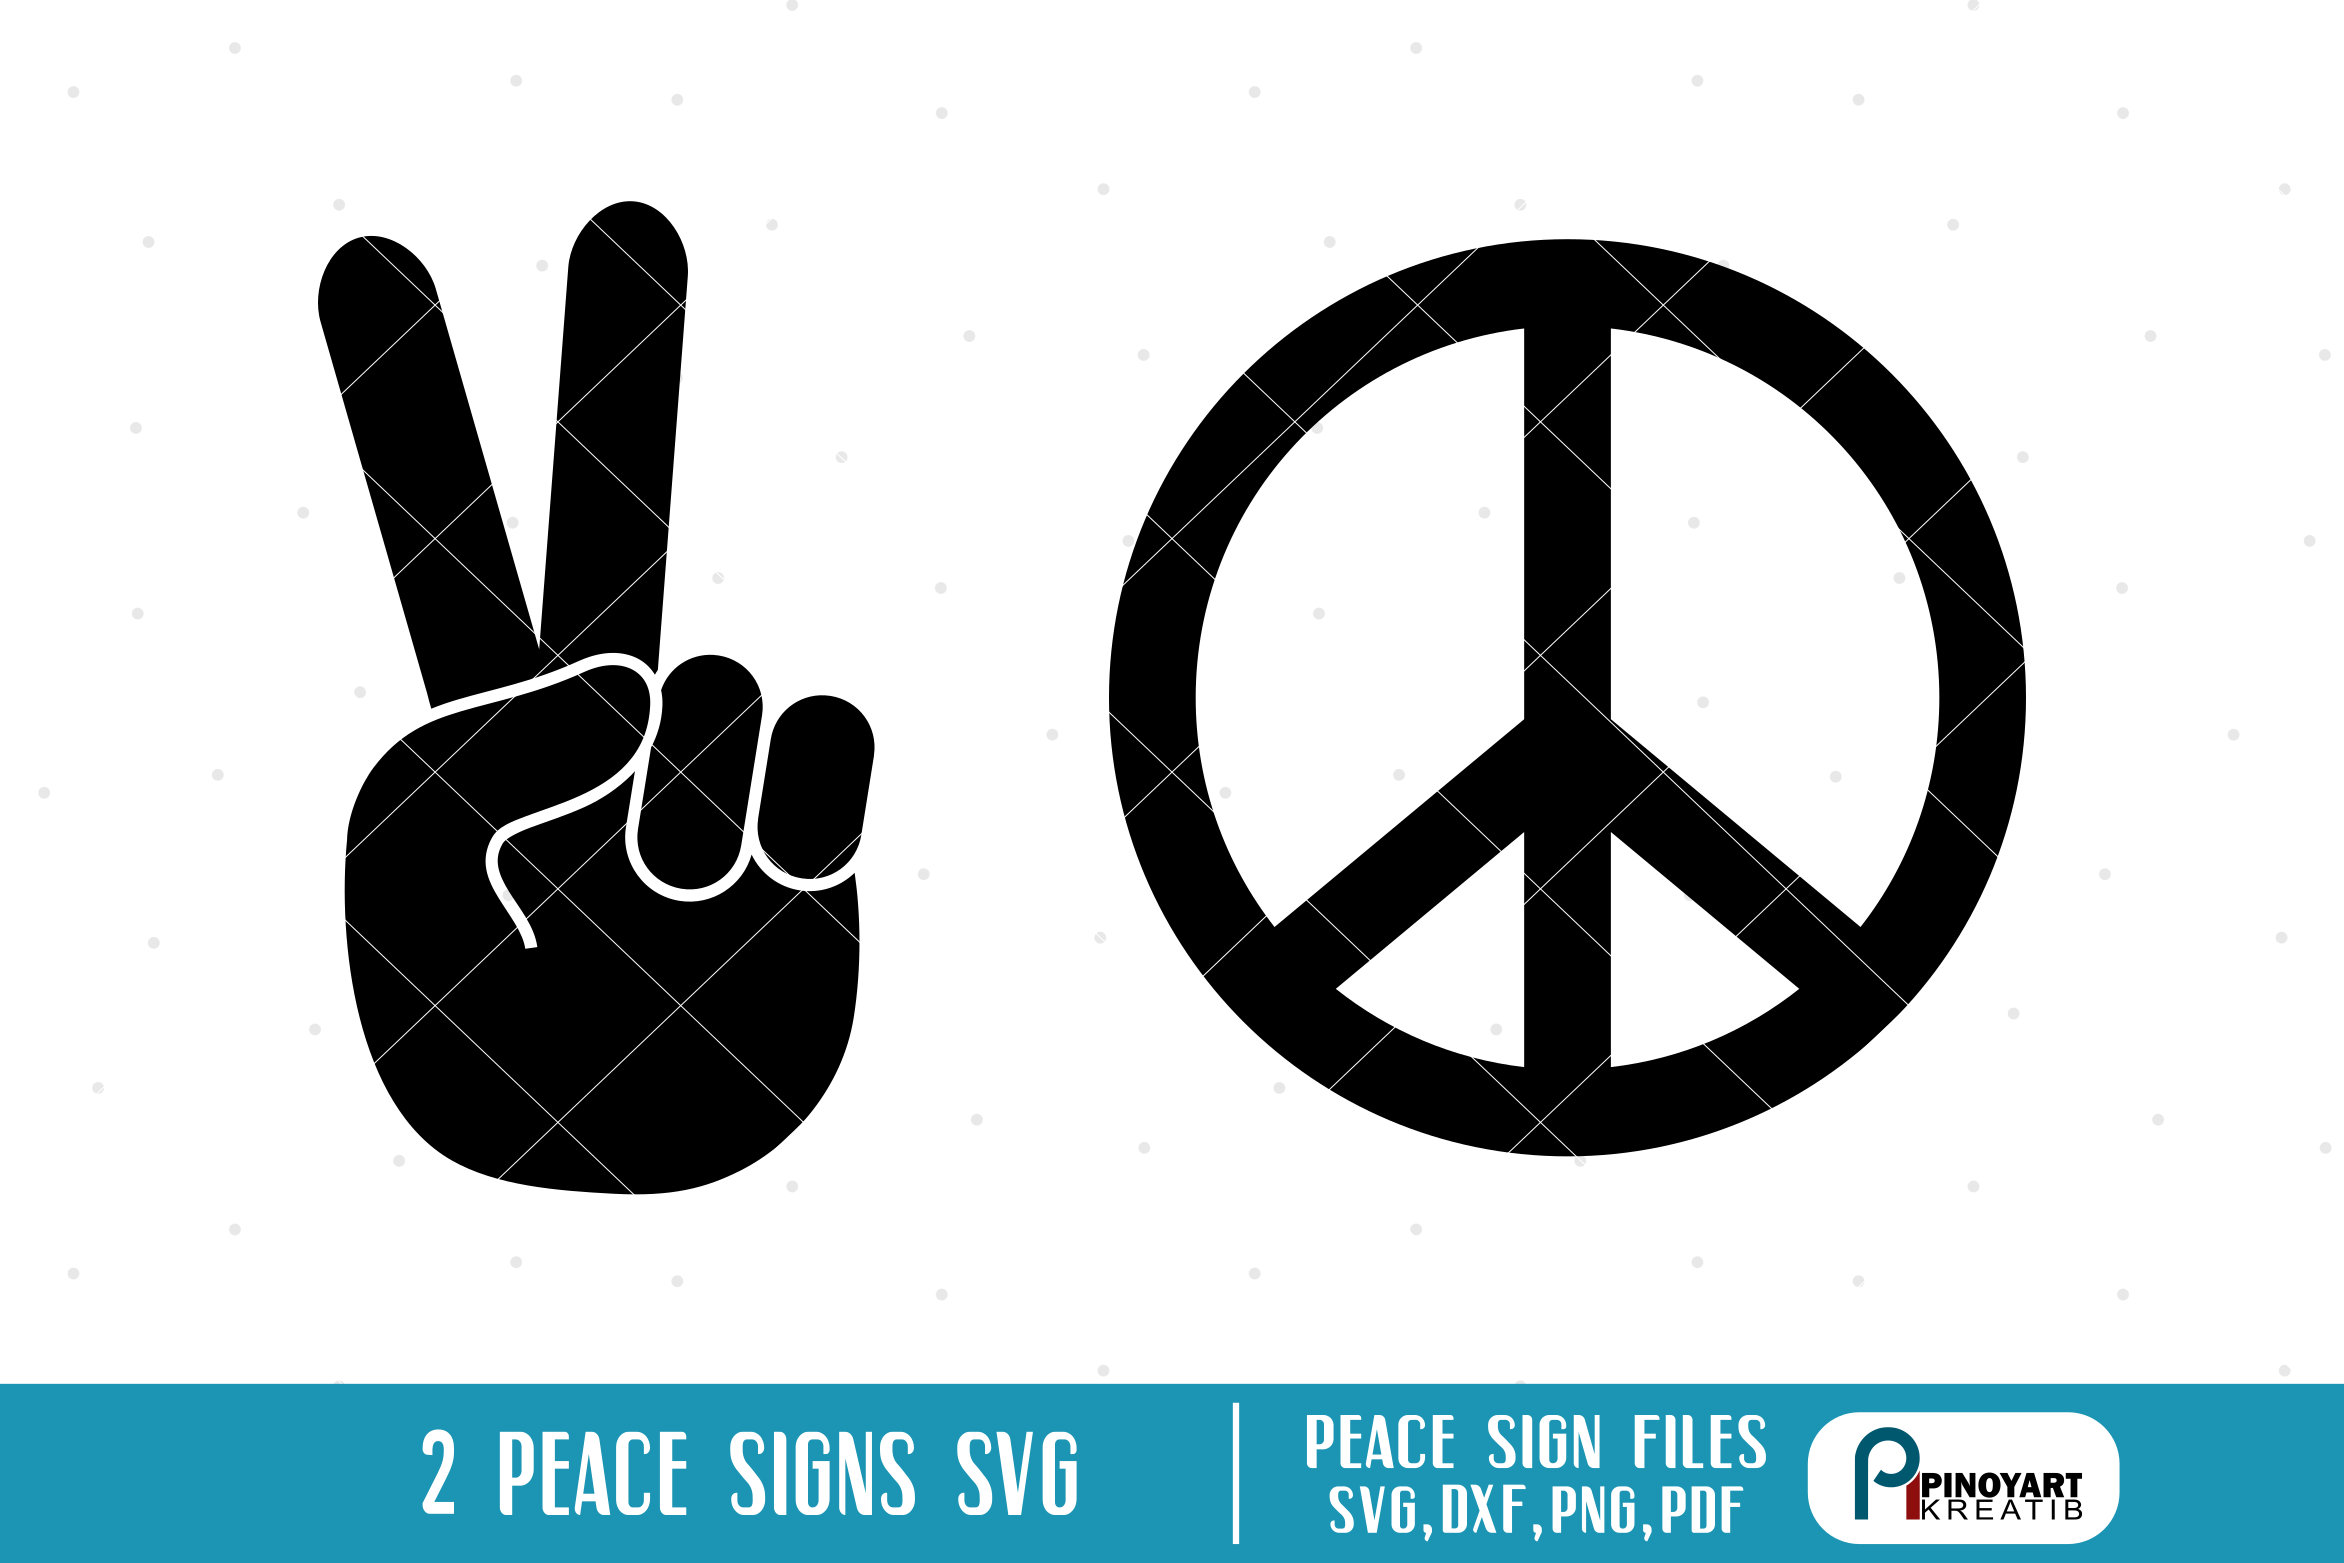 Peace Svg Free - Layered SVG Cut File - Download Fonts - Font For